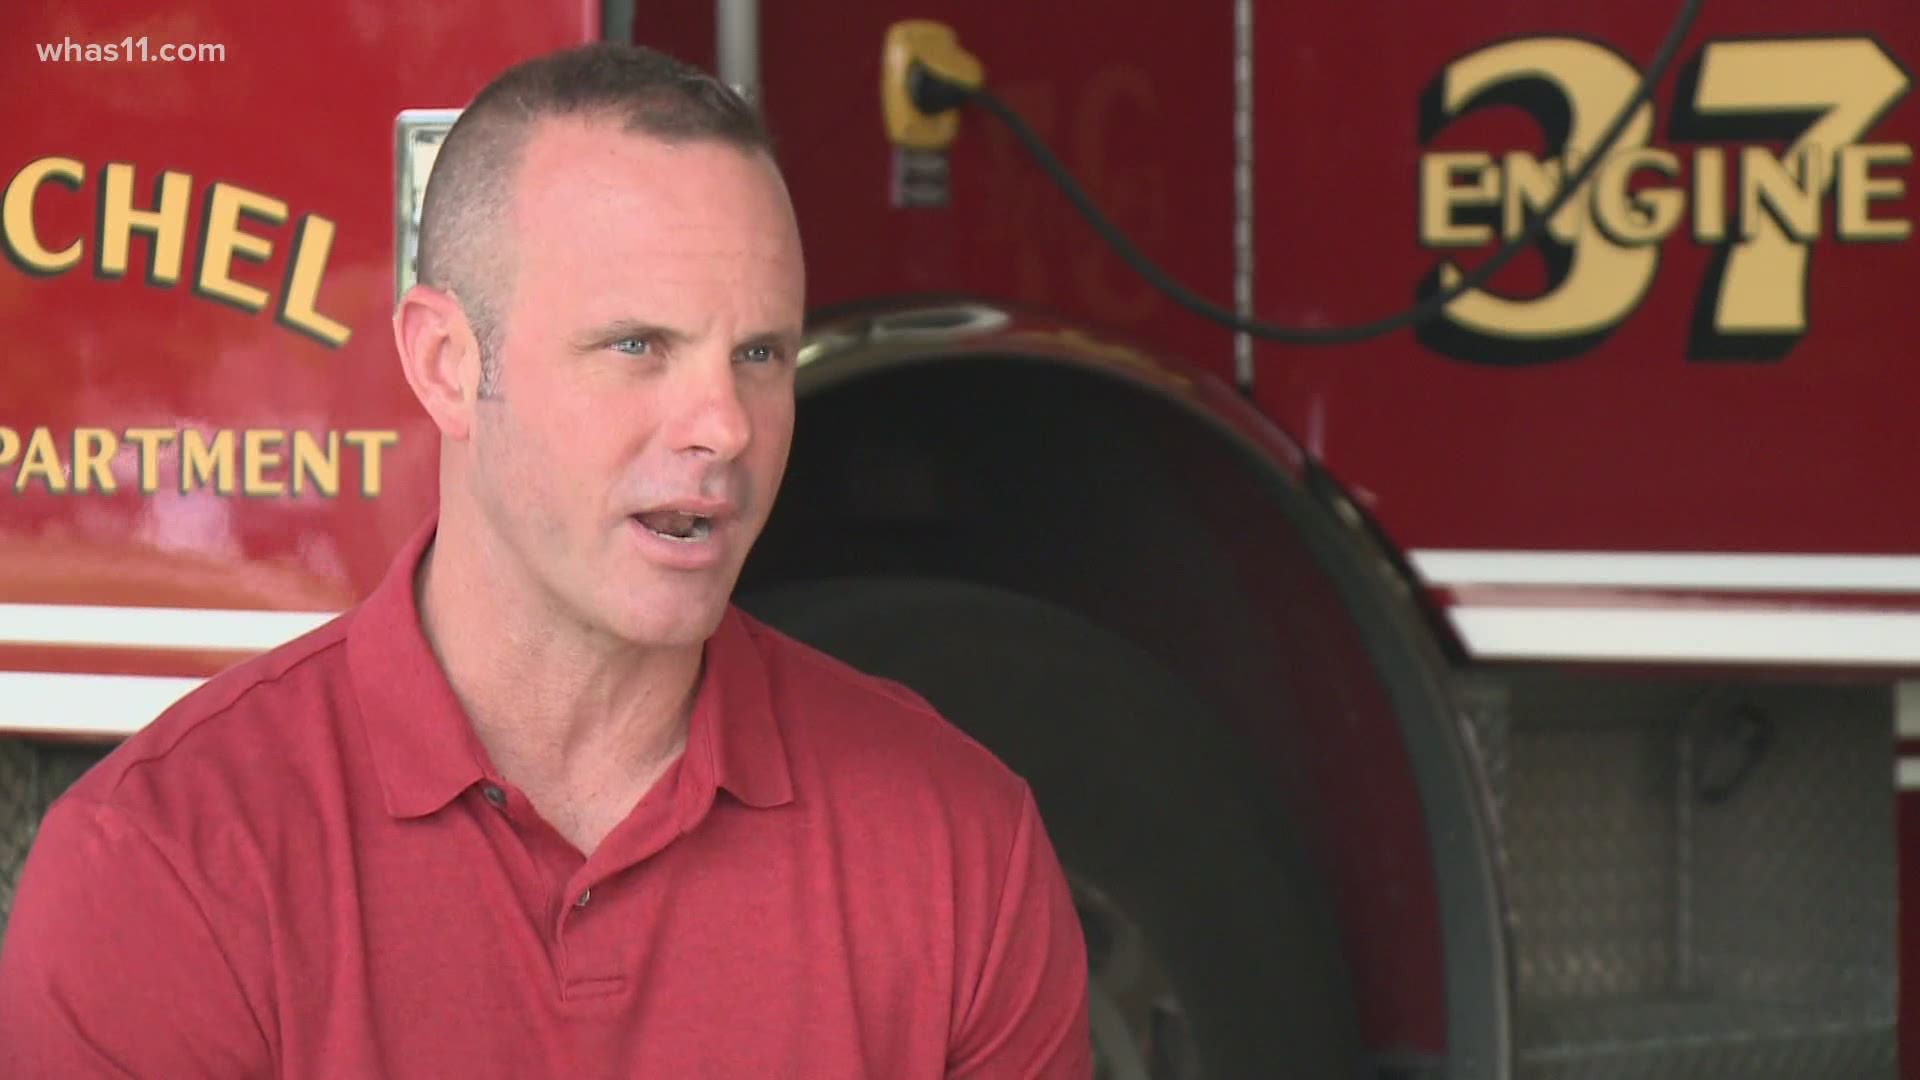 One of the most decorated fire commanders in the Jefferson County fire service is hanging up his hat.